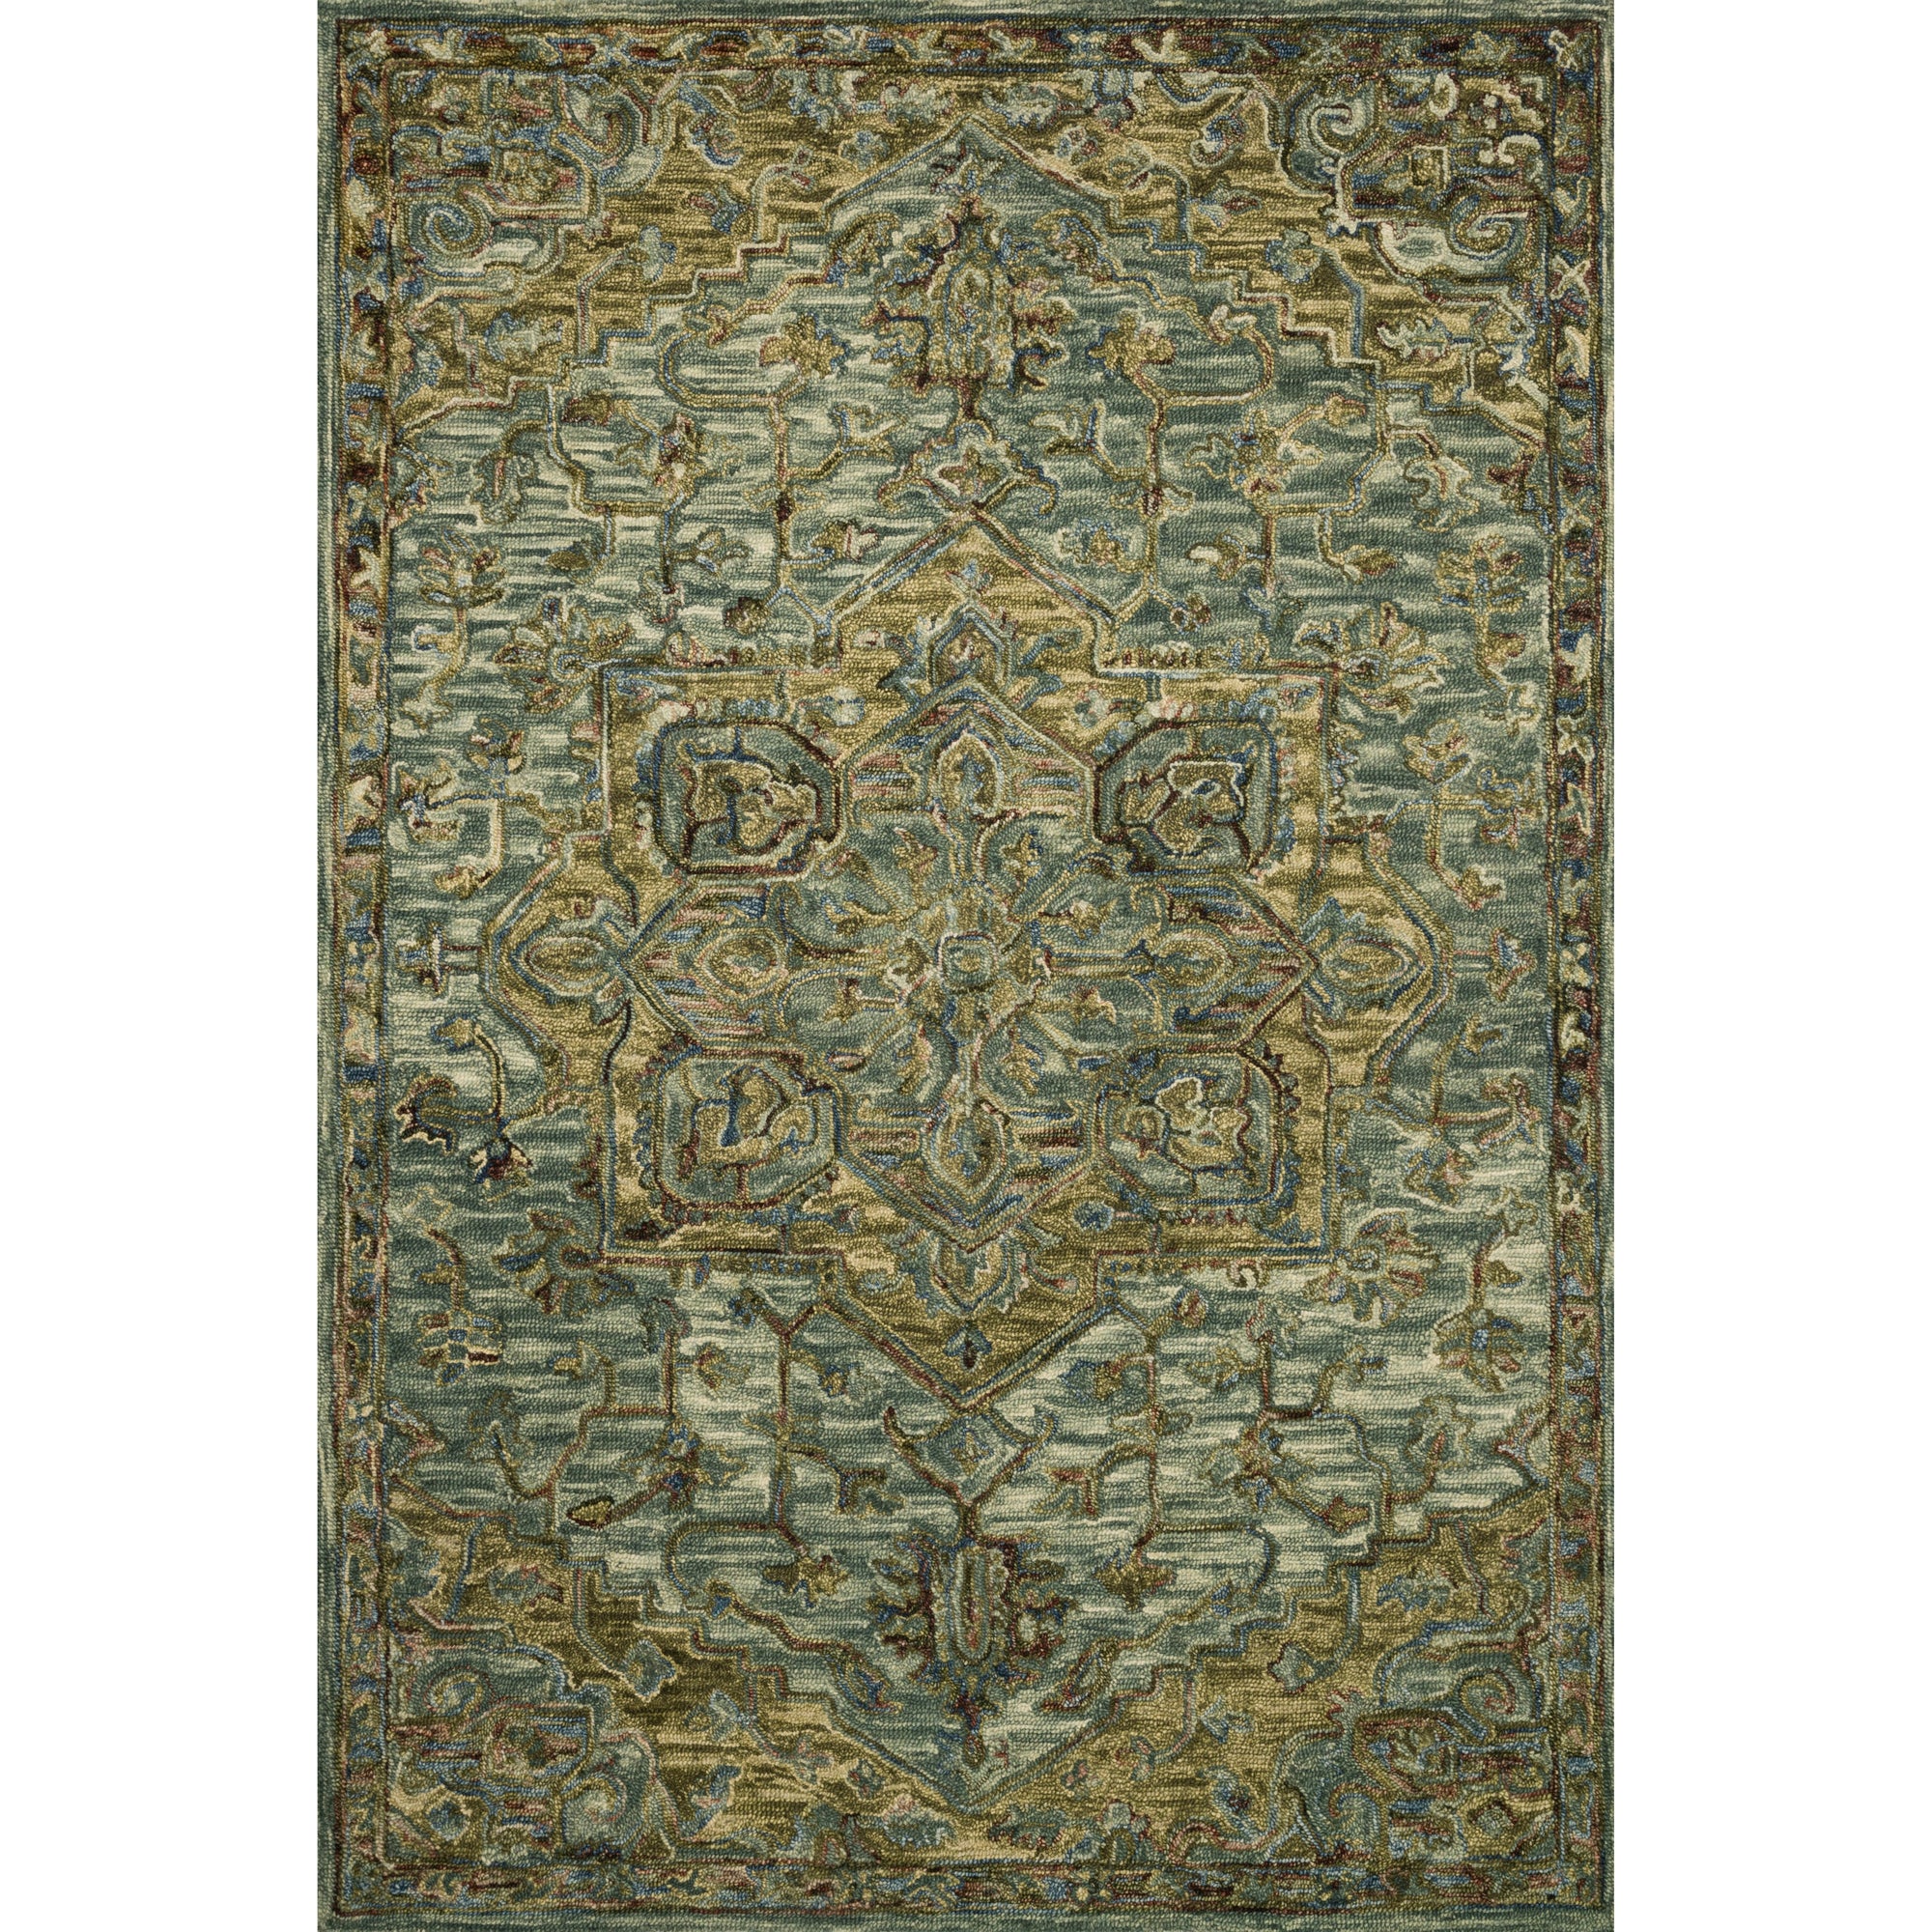 Rugs by Roo Loloi Victoria Dark Green Tobacco Area Rug in size 18" x 18" Sample